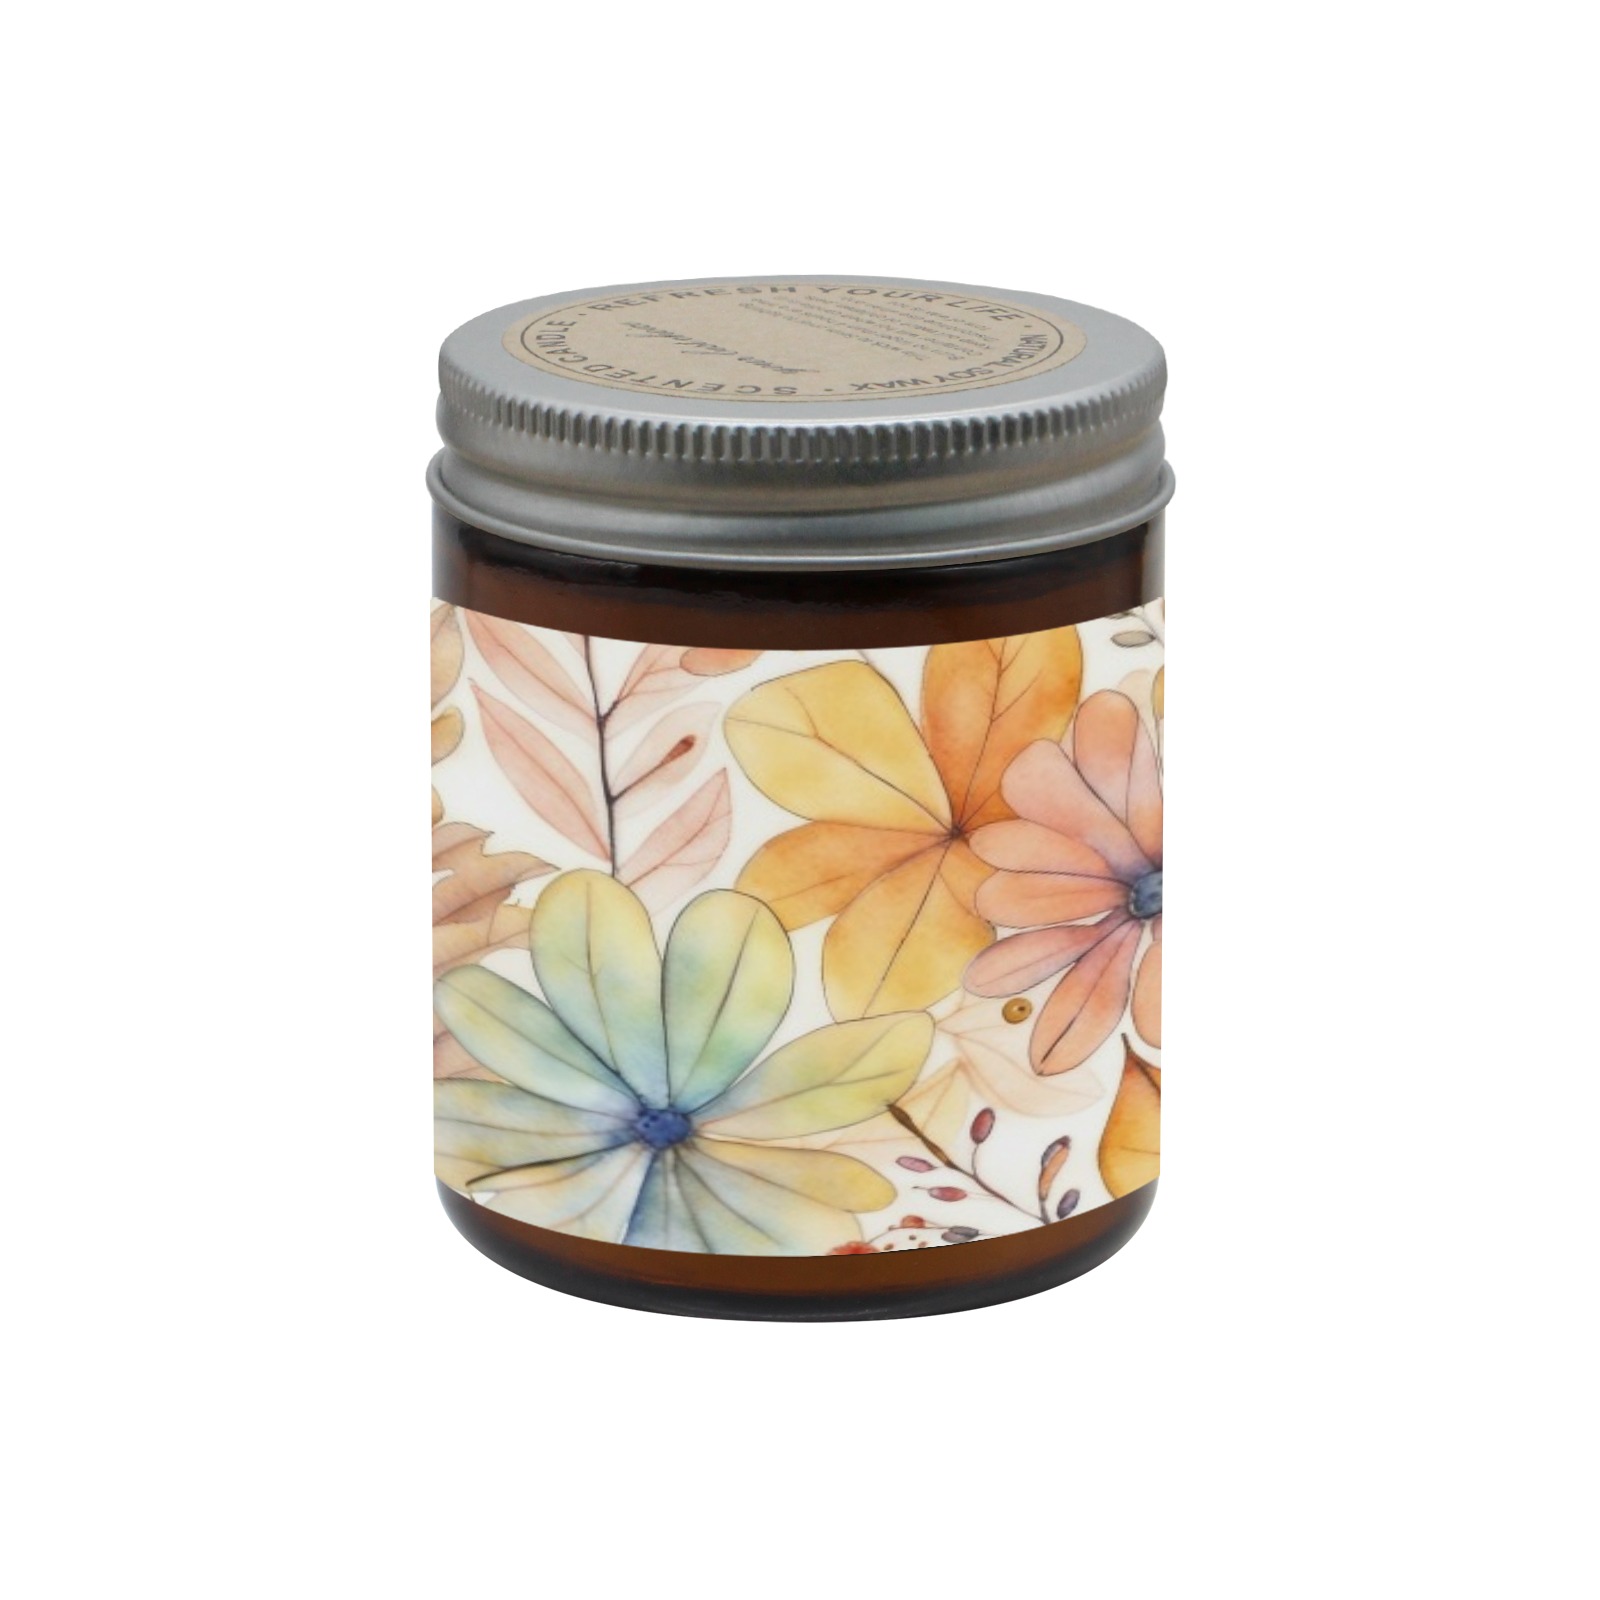 Watercolor Floral 2 Tawny Candle Cup - Large Size (Rose Sandal)